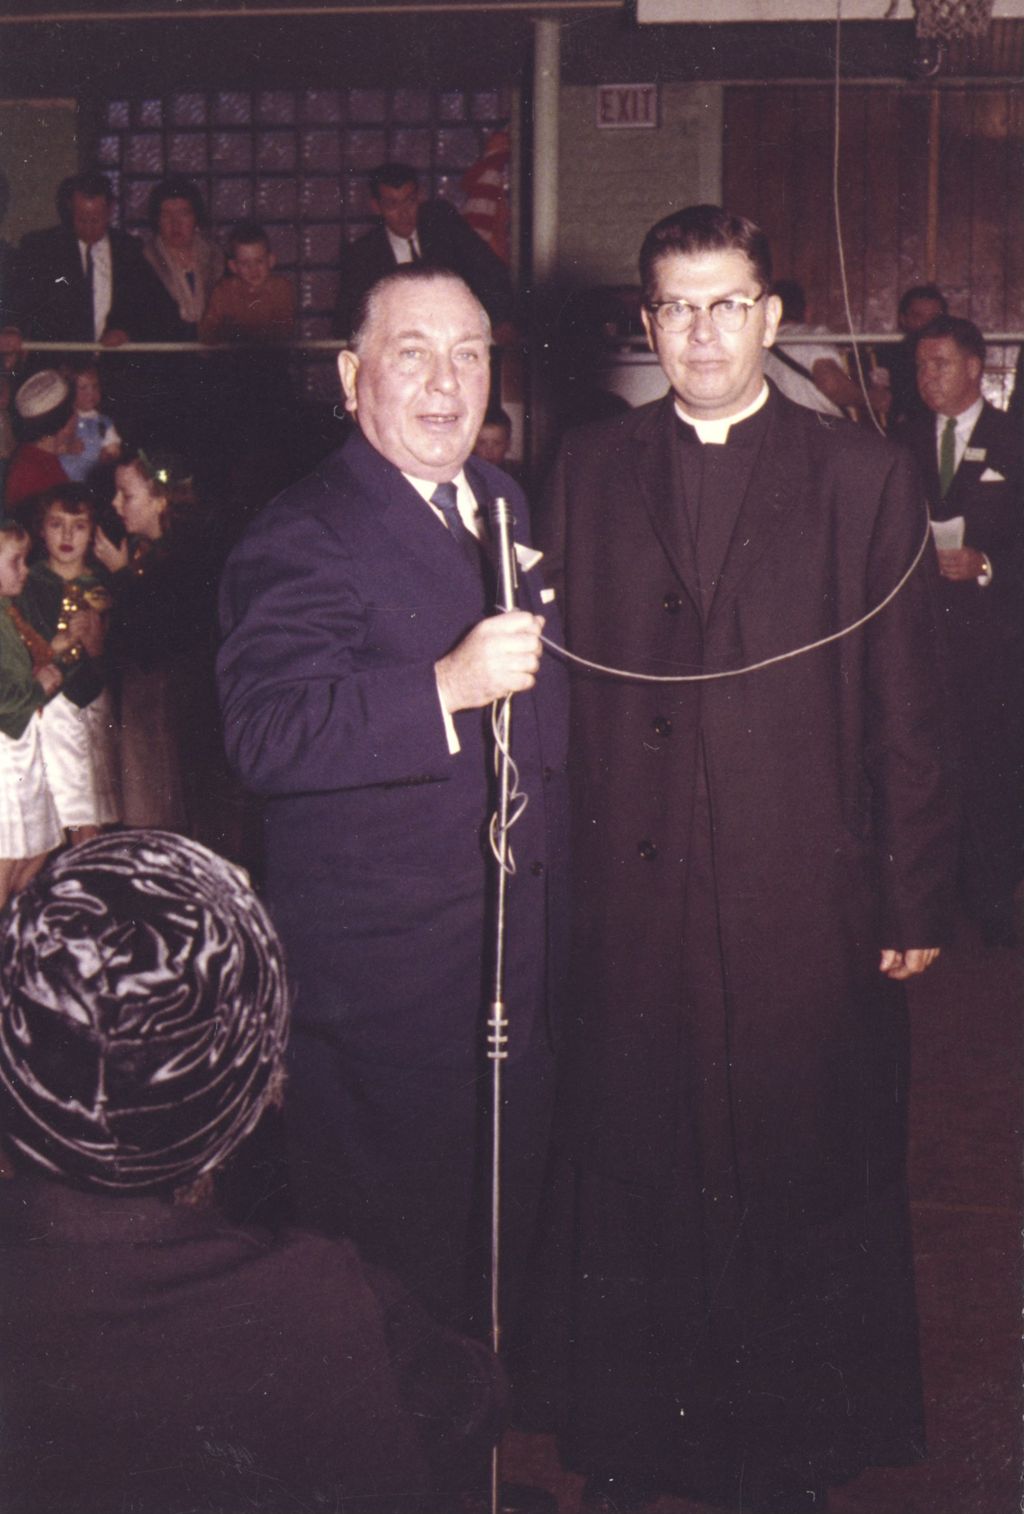 Miniature of Richard J. Daley at a microphone with a priest